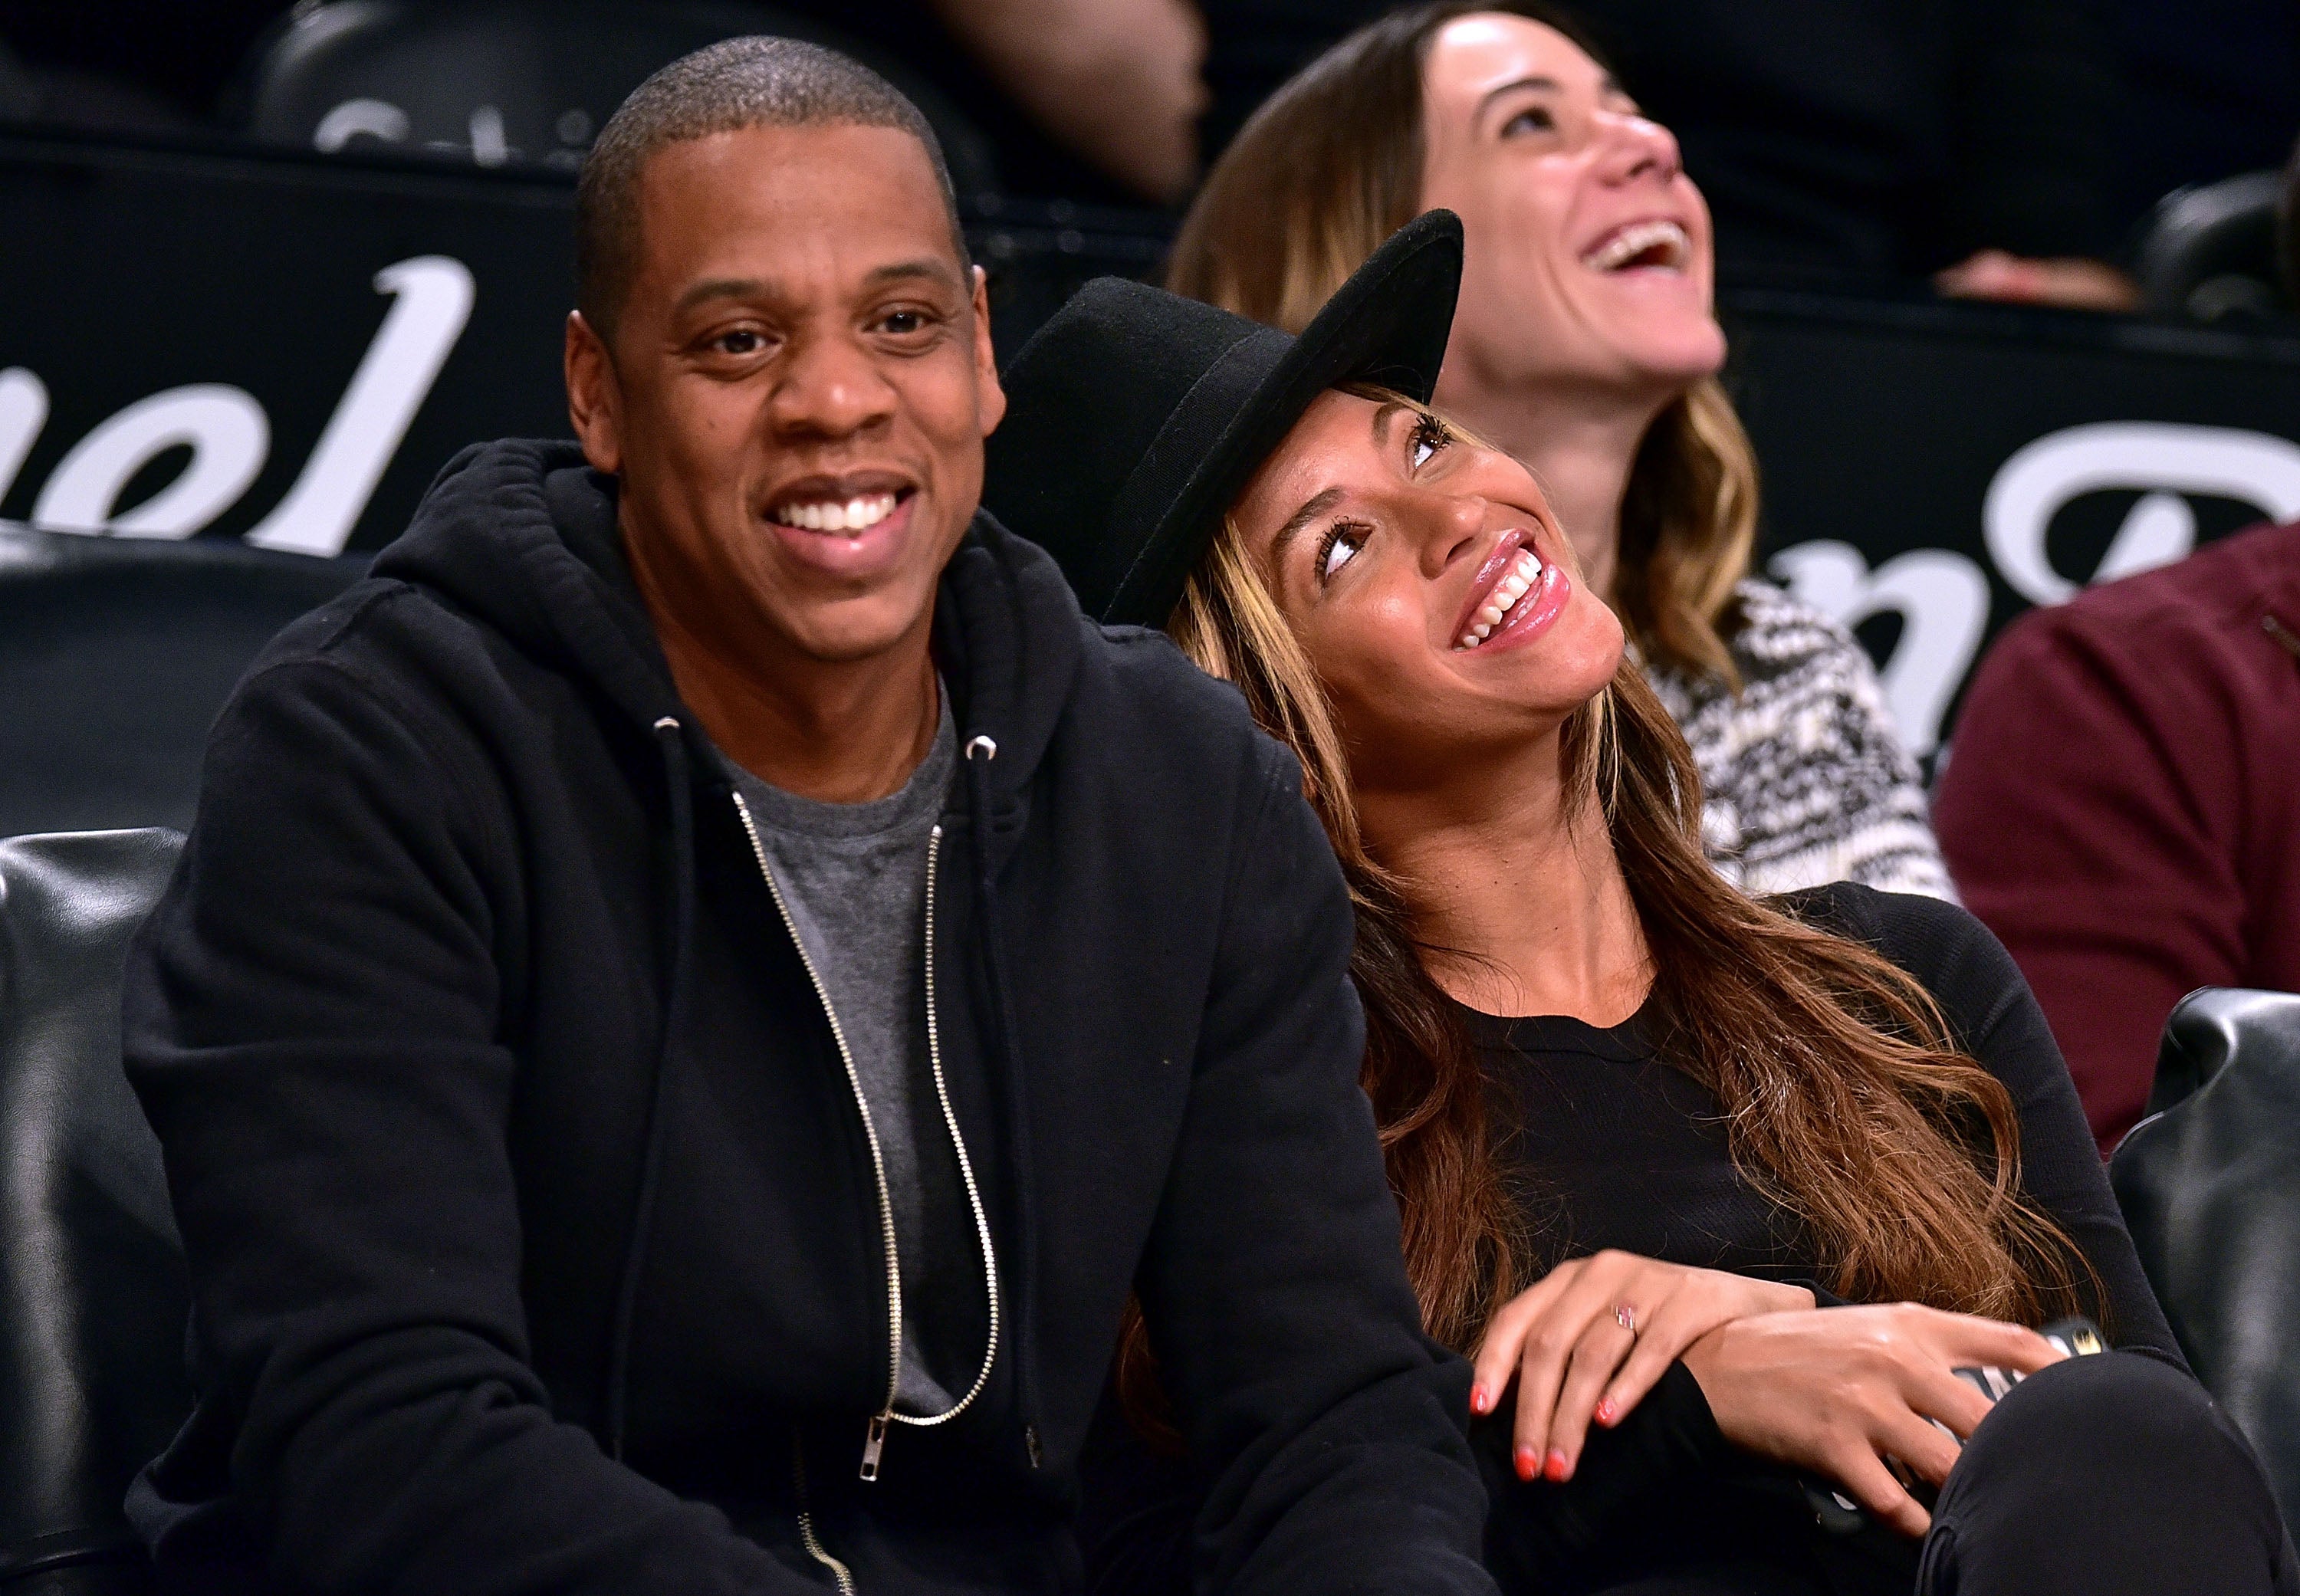 Happy 10th Anniversary! The Most Unforgettable Beyoncé and JAY-Z Moments
